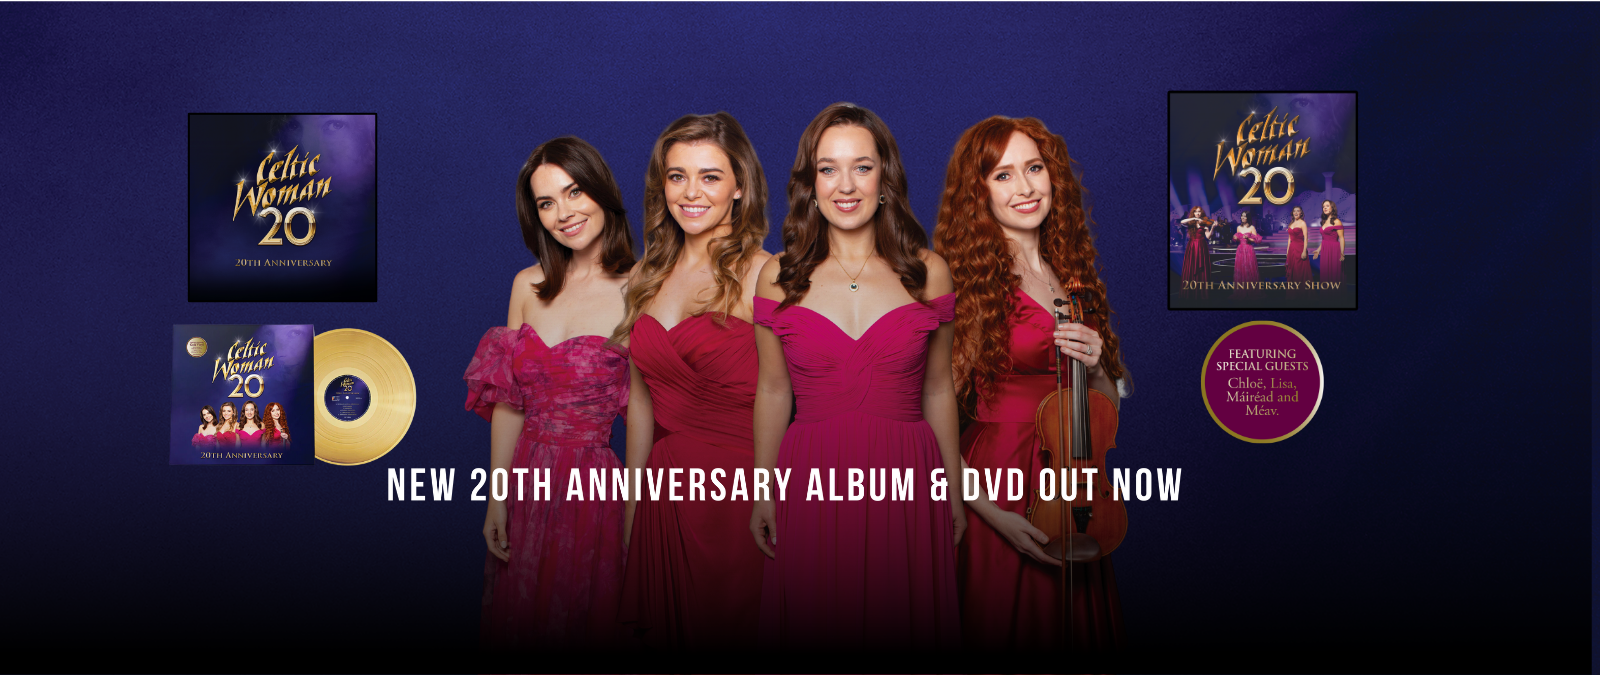 celtic woman tour 2023 in ireland